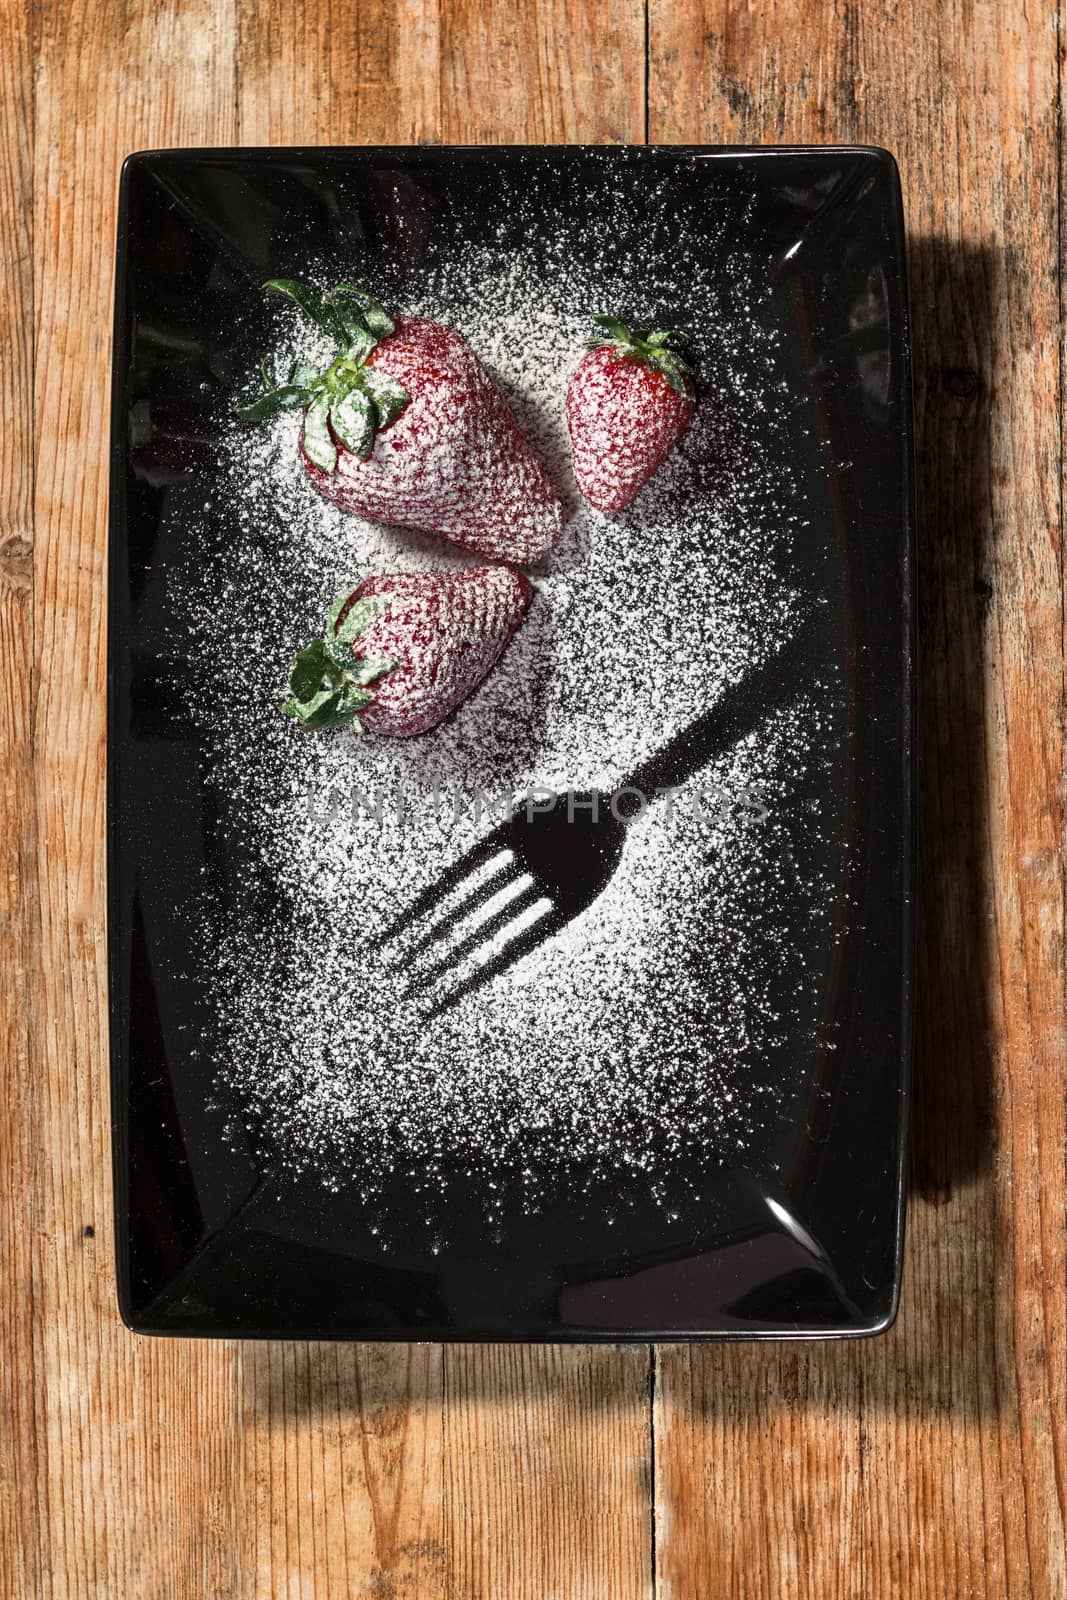 Strawberries with sugar by EnzoArt